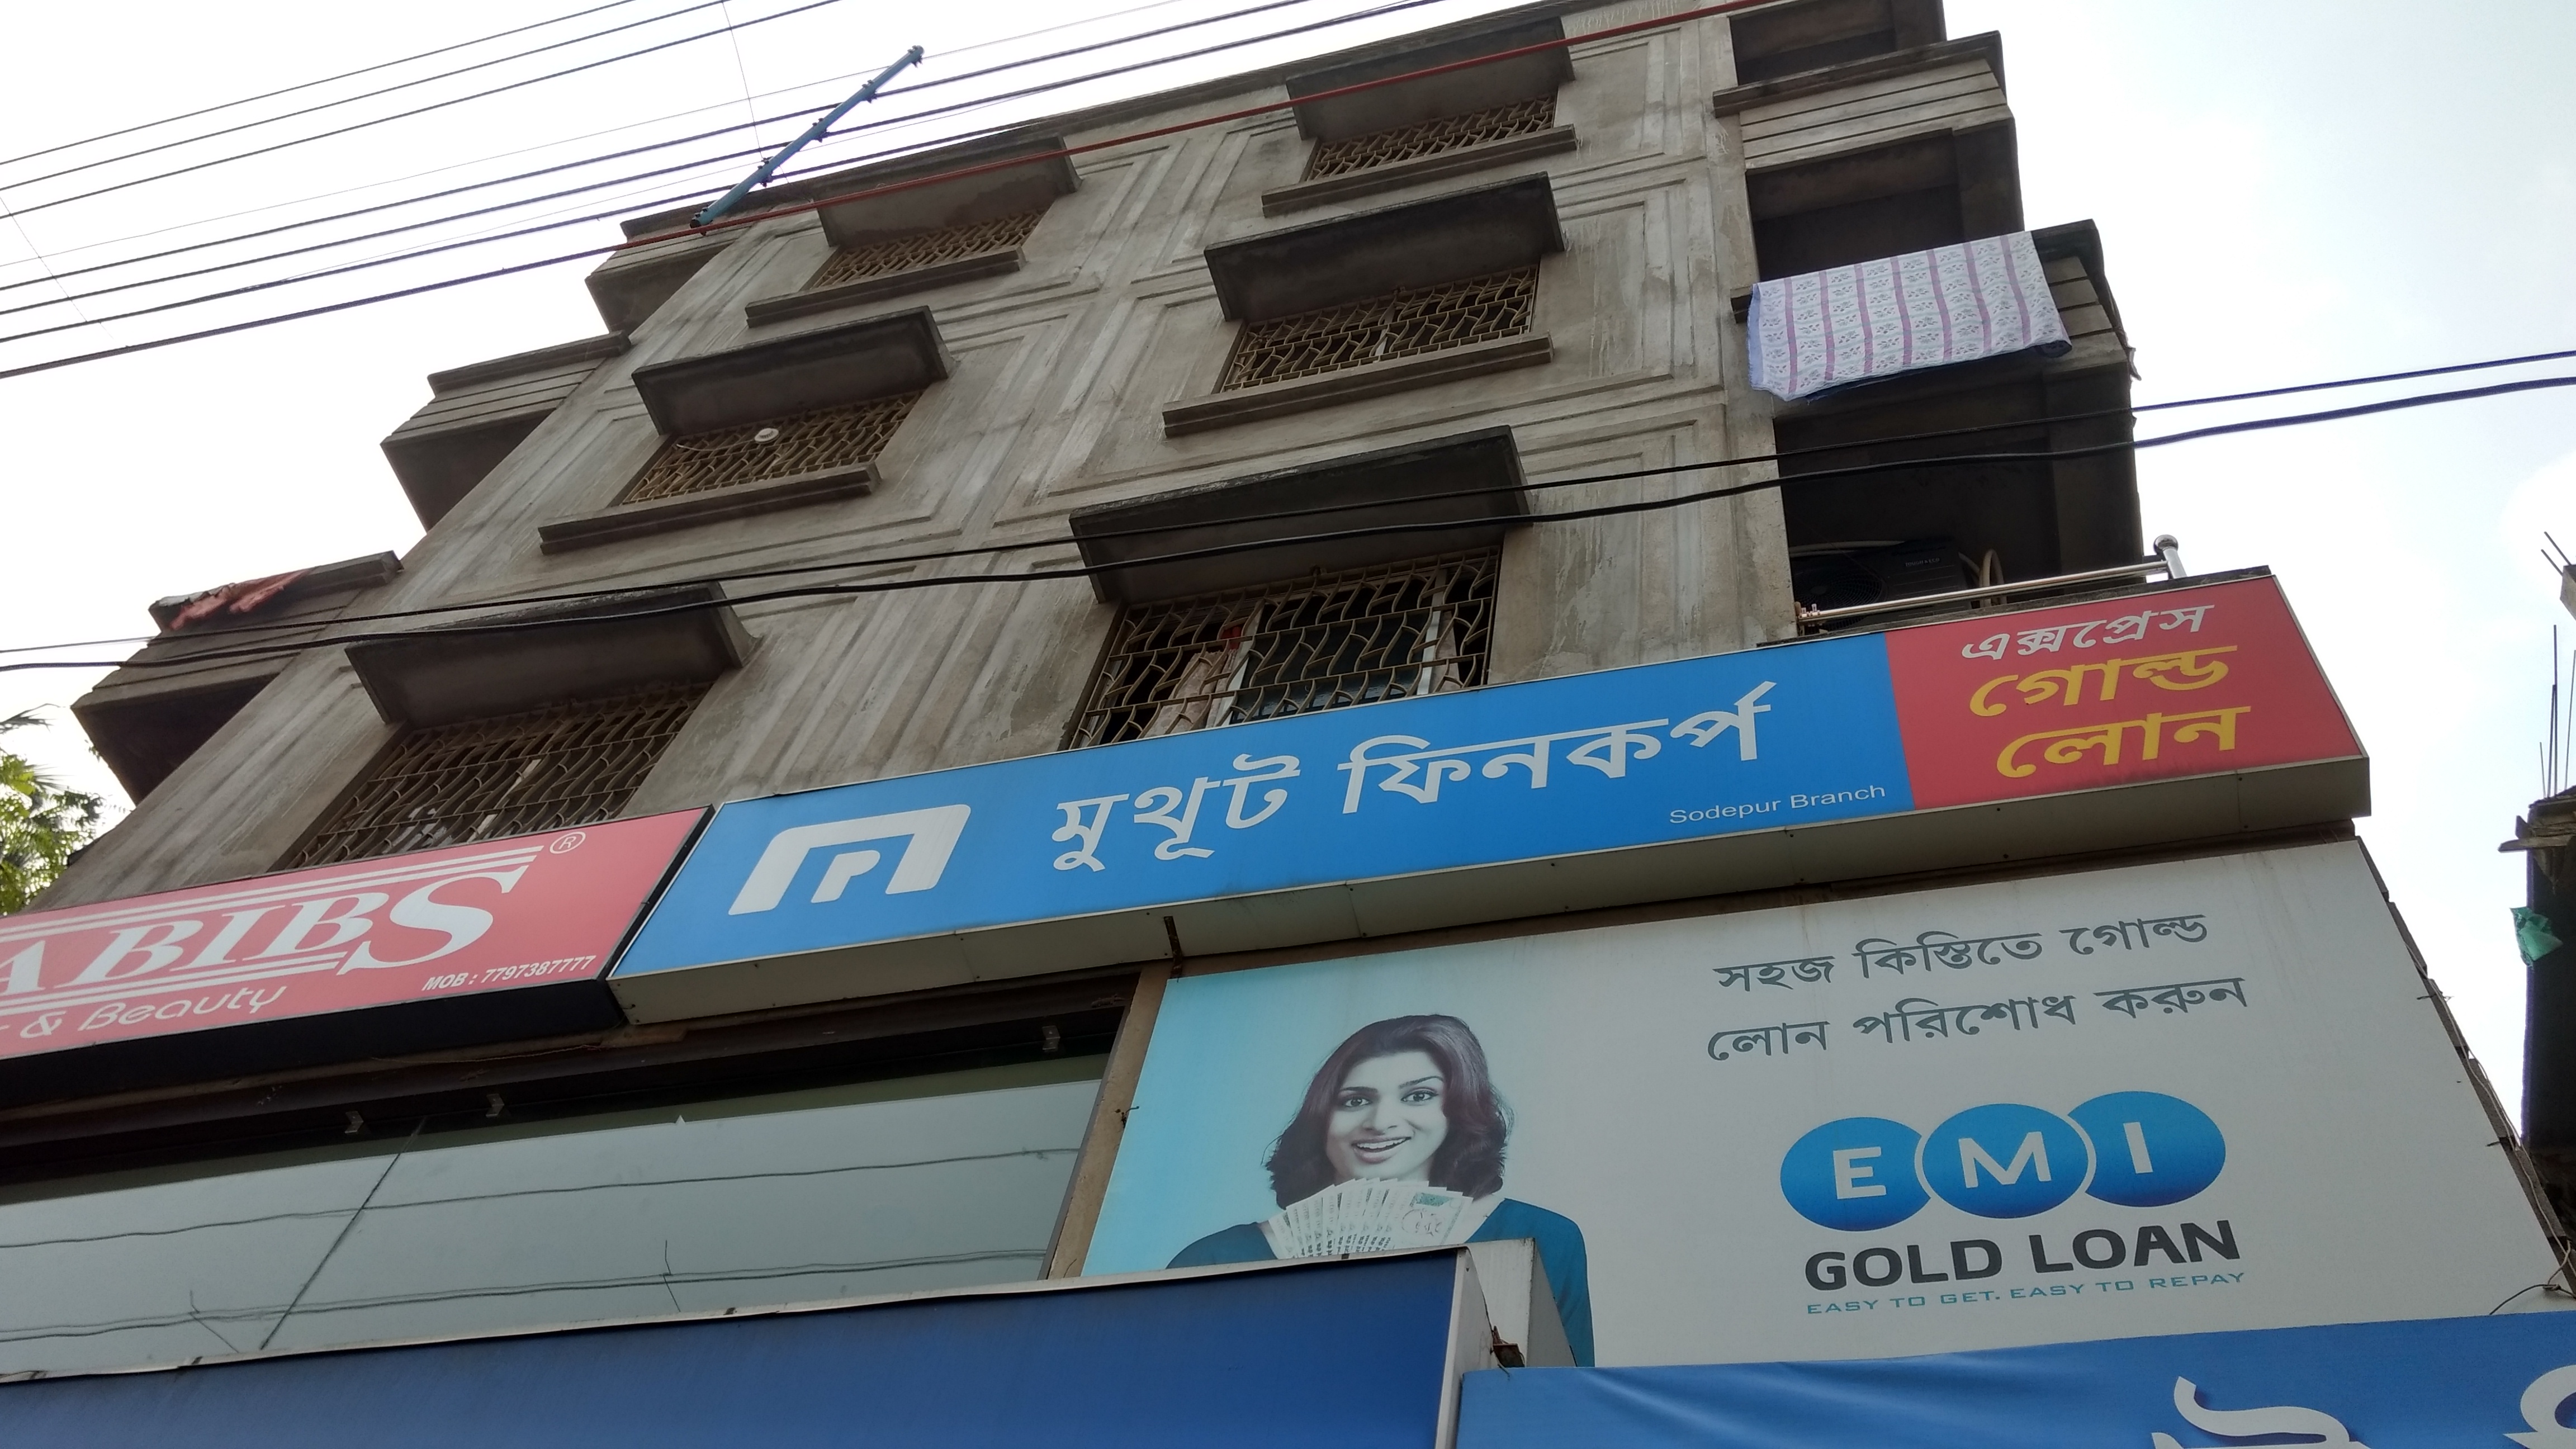 Photos and Videos of Muthoot Fincorp Gold Loan in Sodepur, Kolkata